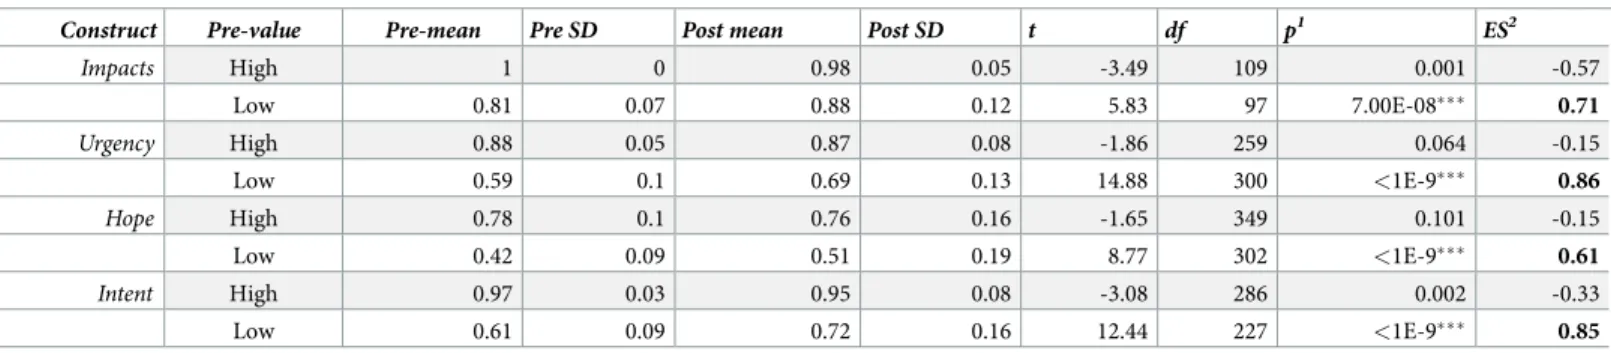 Table 6. Analysis of gains and effect sizes for participants who began the simulation with low (lower third) vs